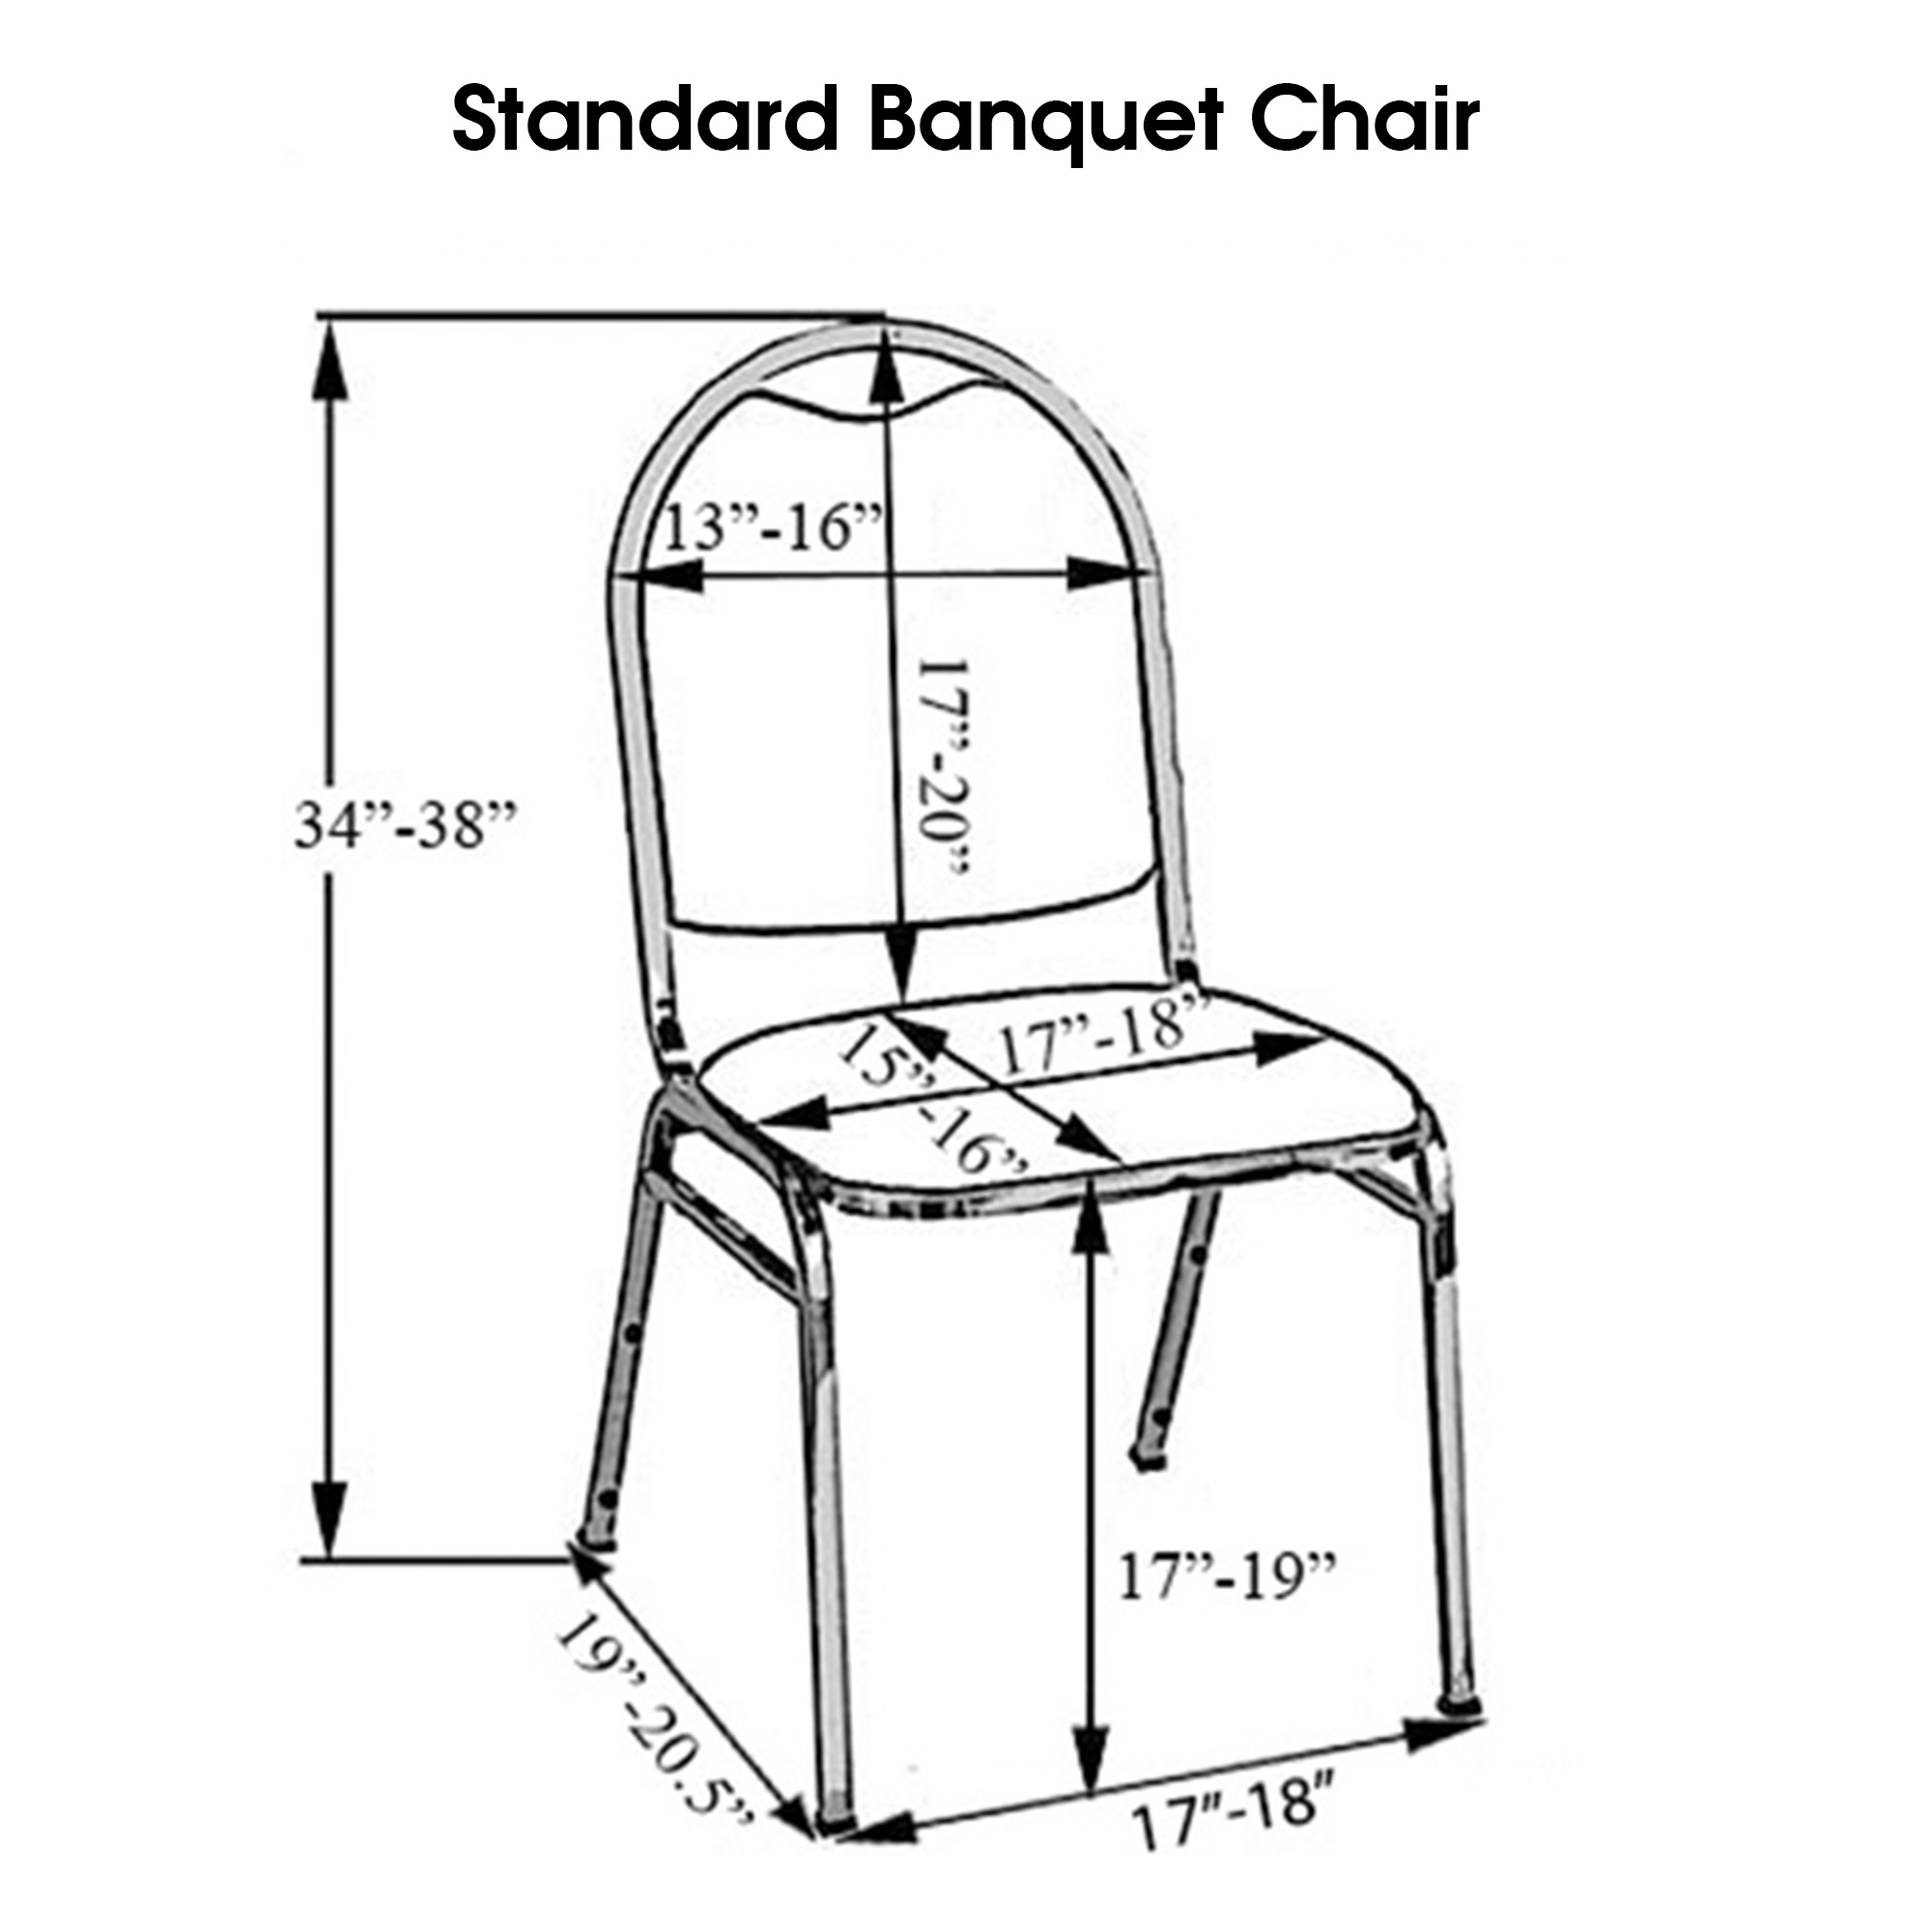 How to Measure Banquet Chair Covers